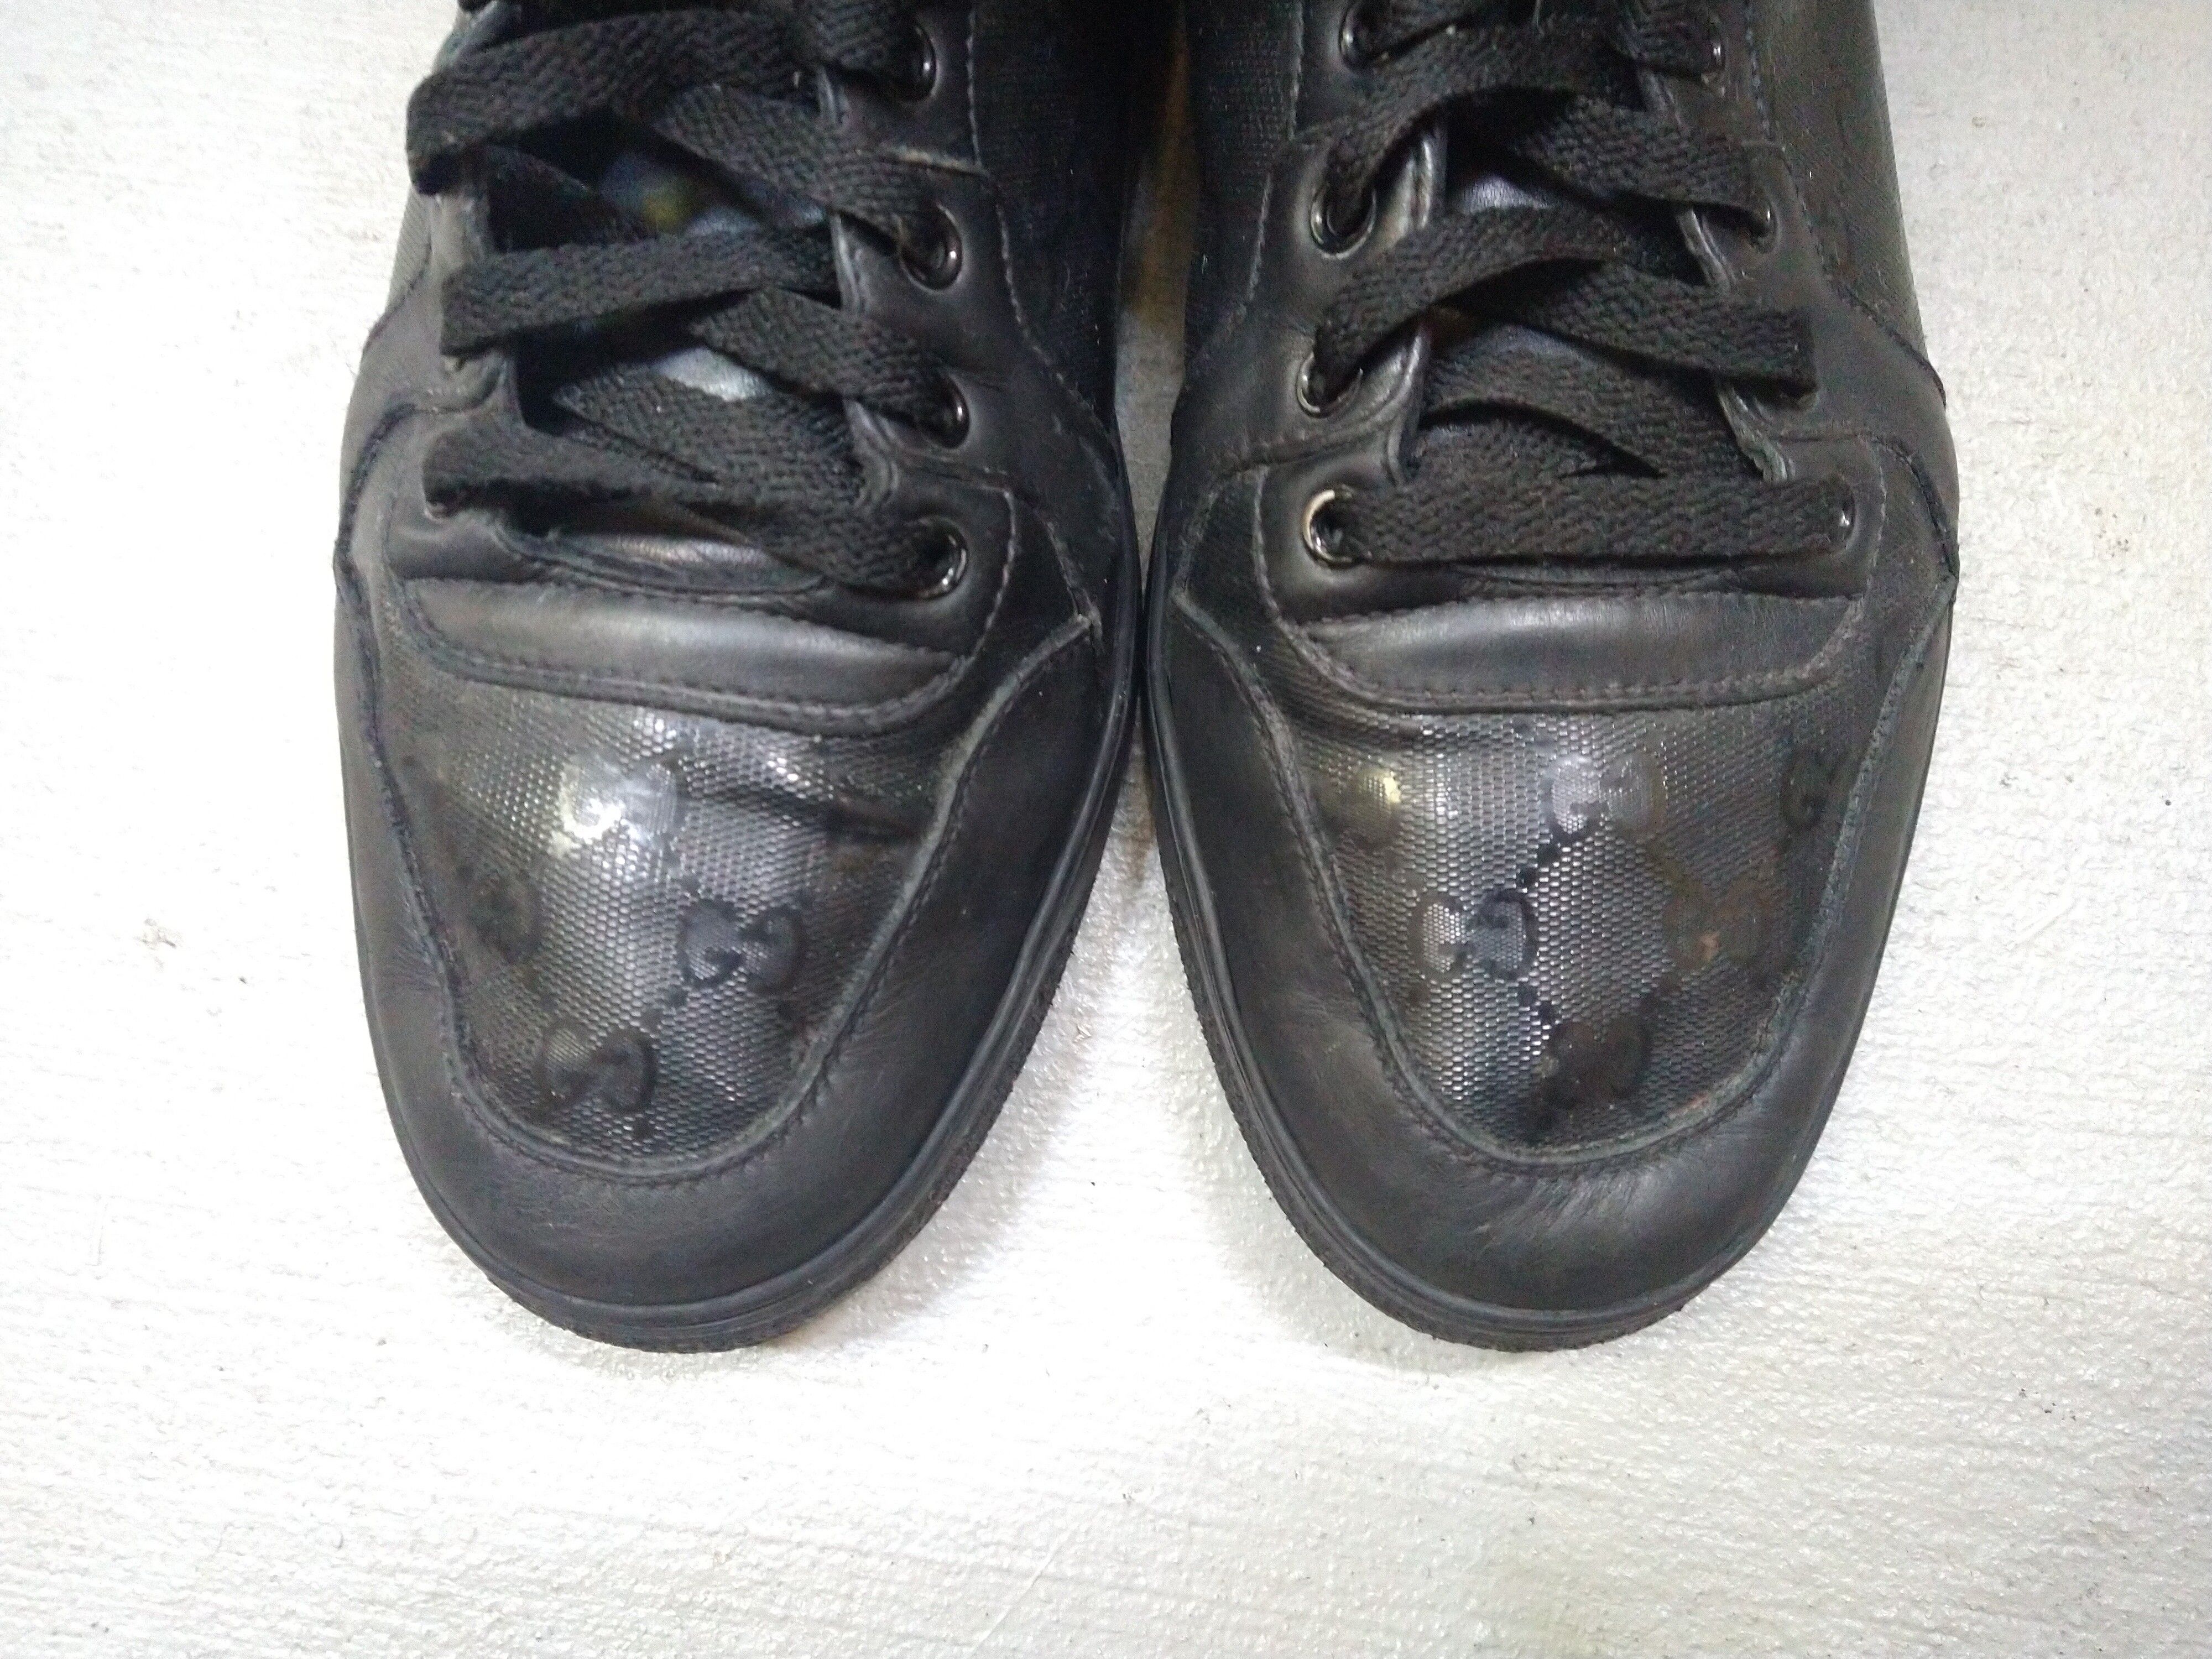 Gucci Gucci High Top Sneakers Black Leather Size 11 Lace Up Size US 11 / EU 44 - 4 Thumbnail